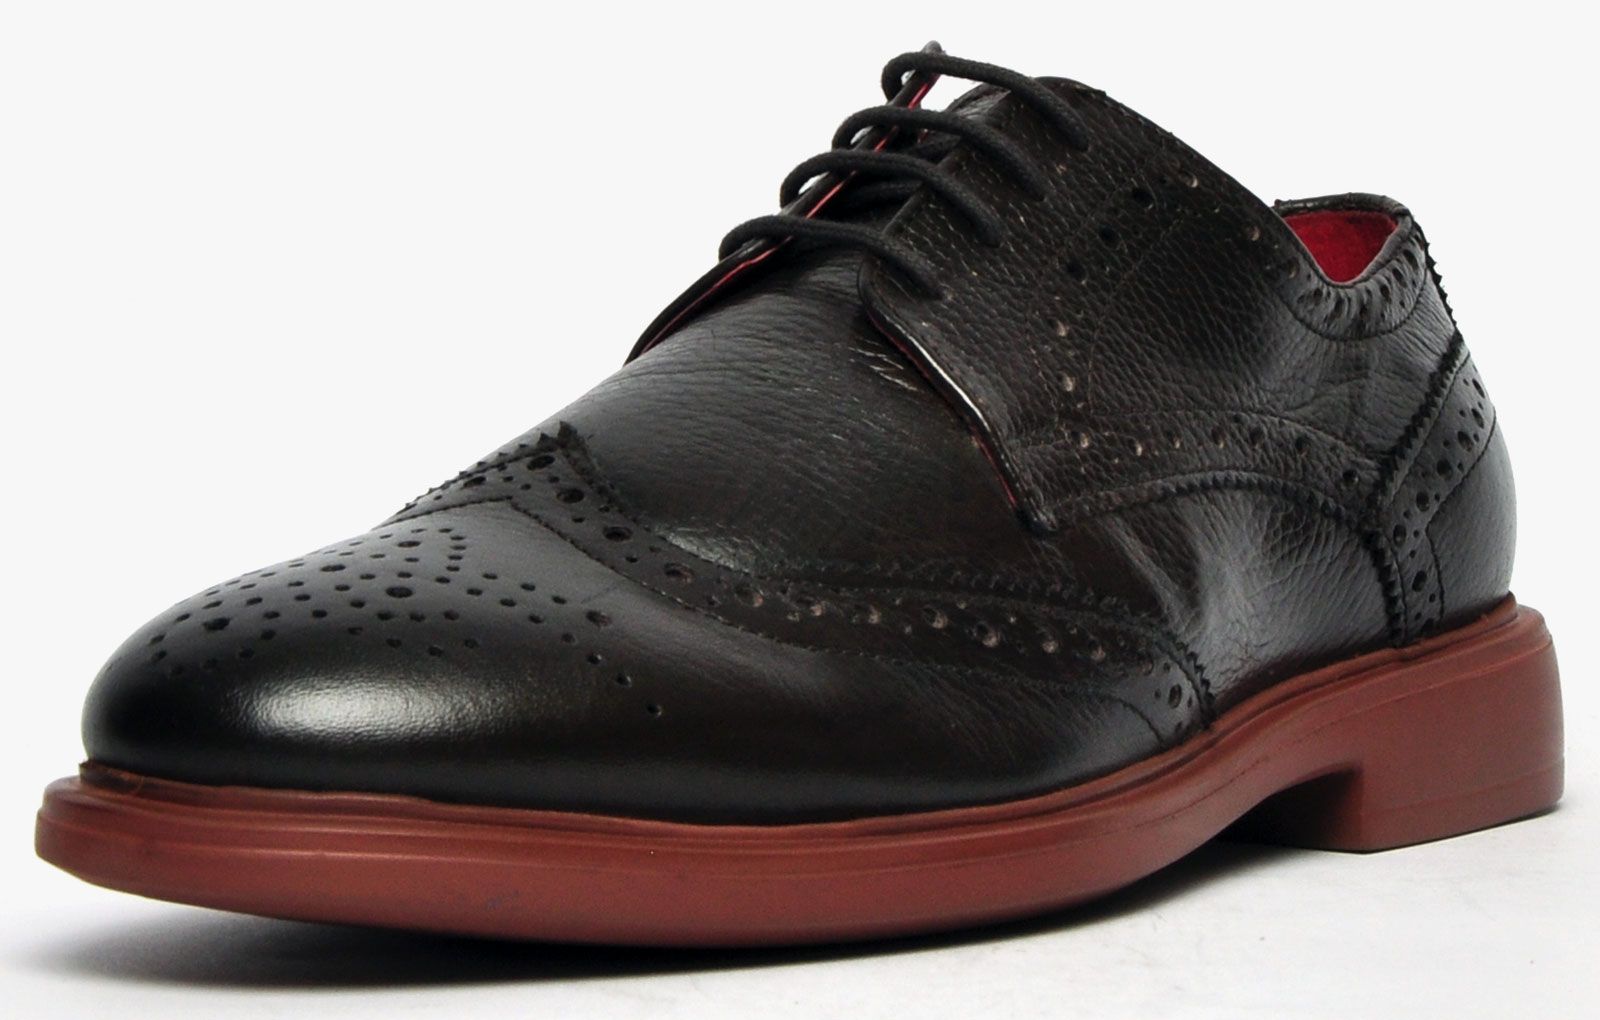 The Lambretta Spencer is a high-end designer brogue shoe. Achieve the perfect mix between smart and casual in these Lambretta brown leather mens brogue shoes. Crafted in a sleek design with a classic lace up system, durable outsole with a slight raised heel and premium leather upper, these shoes will compliment a variety of outfits. 
 
 - Premium leather upper
 
 - 4-hole lace closure
 
 - Durable outsole
 
 - Padded footbed for comfortable wear
 
 - Leather inner lining
 - Lambretta branding